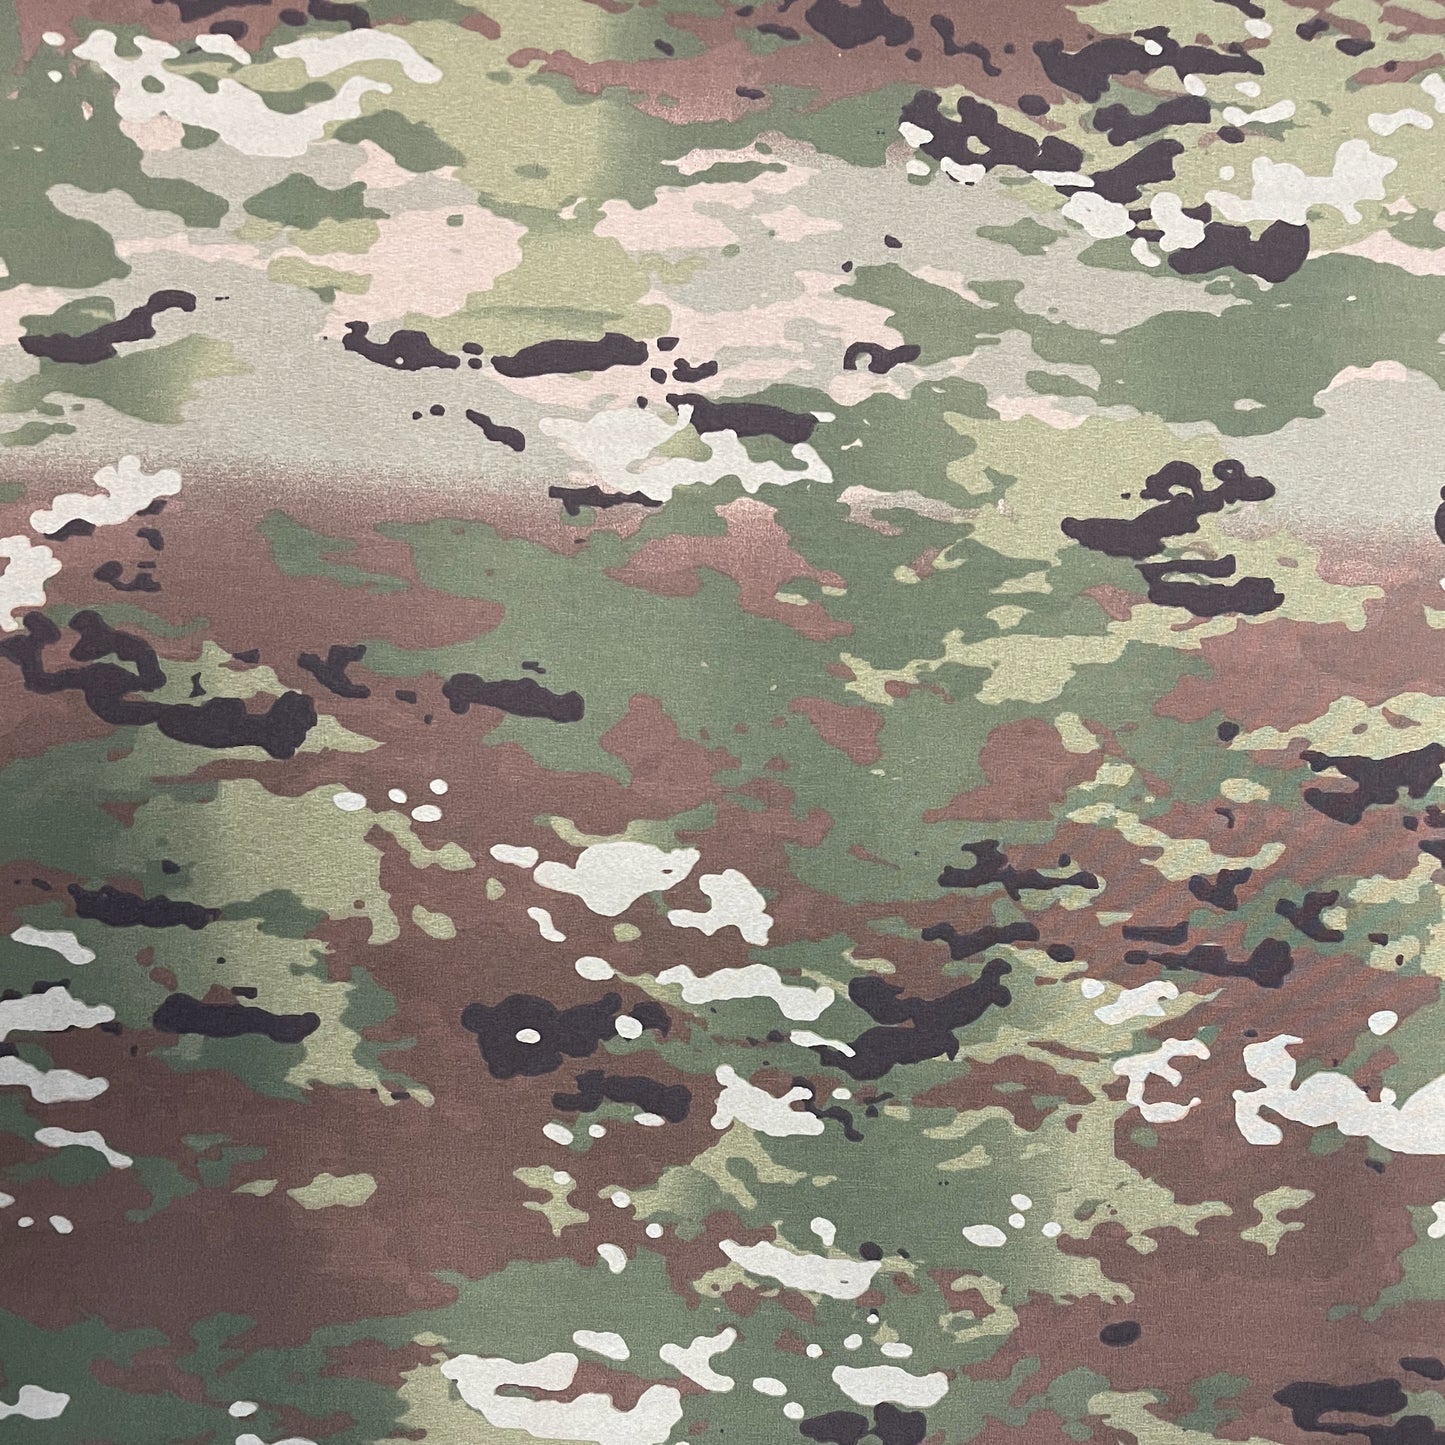 3-Layer Taslite 2.8 Ounce Nylon Waterproof Breathable Camouflage Fabric - Scorpion W2 (Sold per Yard)